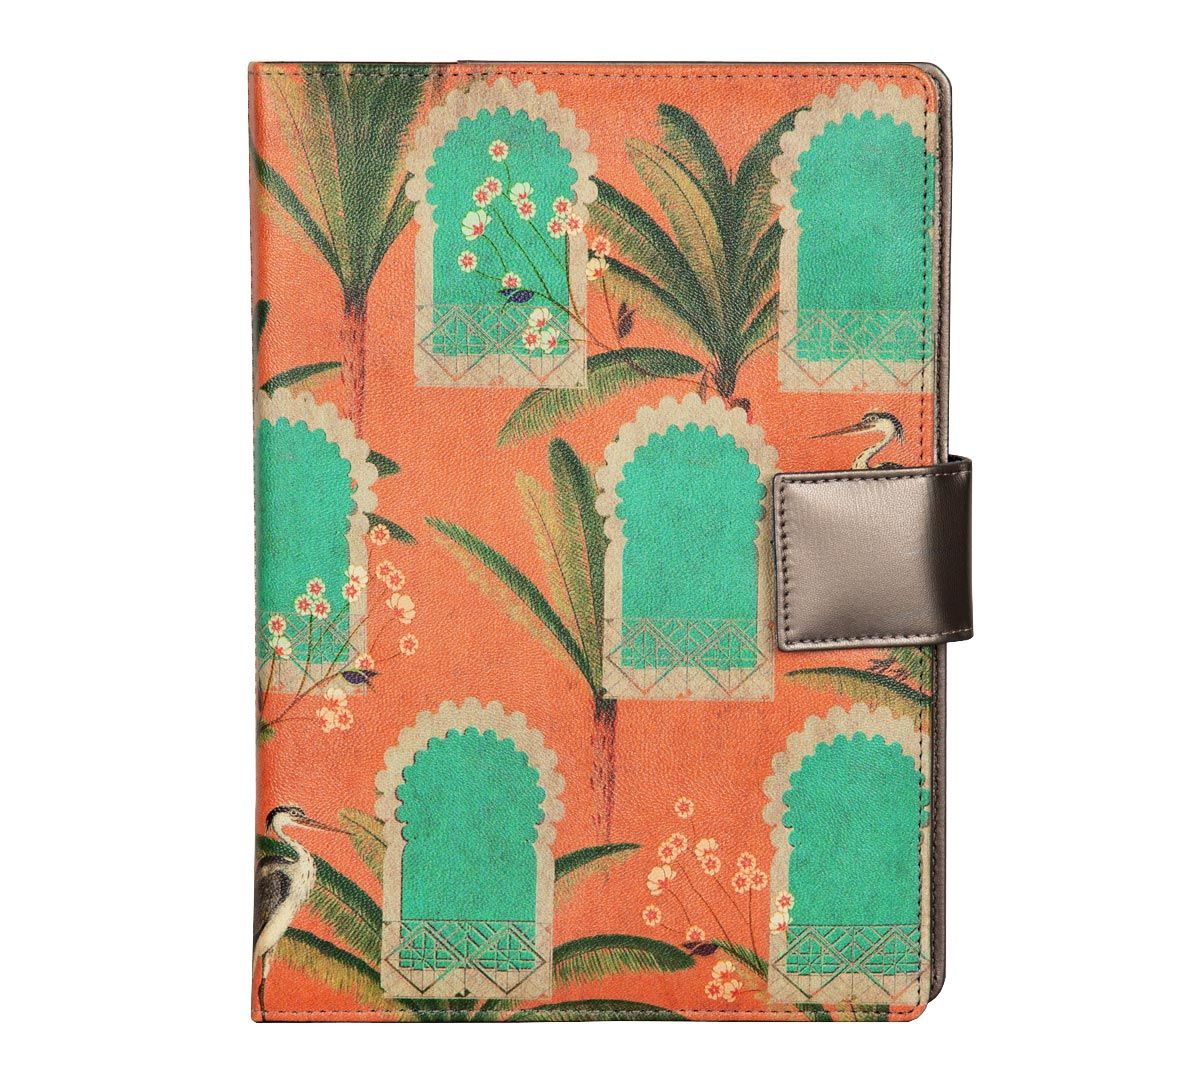 India Circus Heron's Palace Notebook Planner